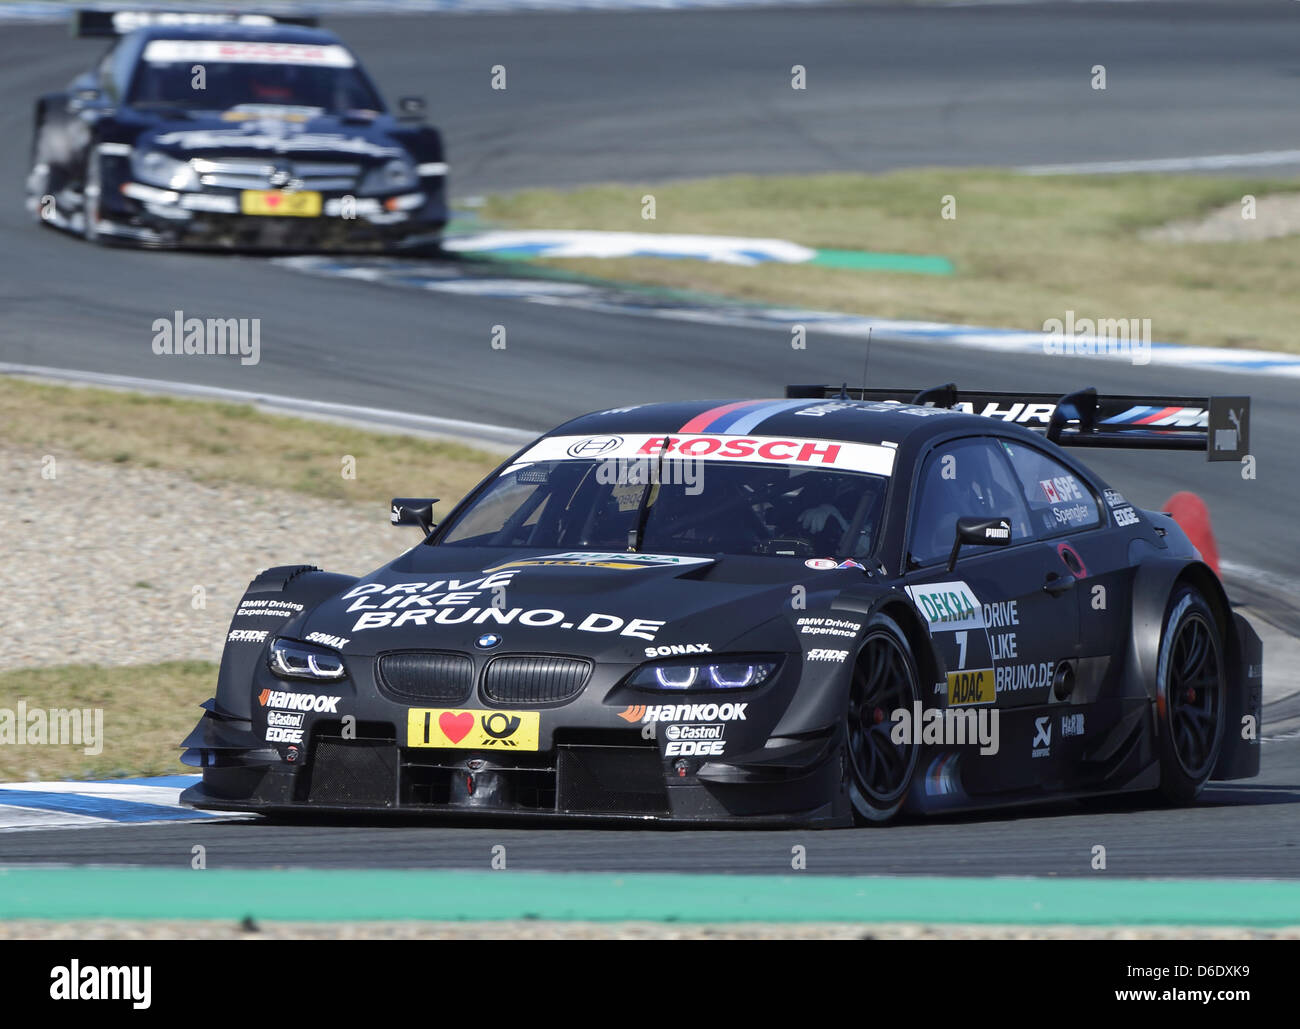 Canadian BMW driver Bruno Spengler leads the field in front of British Mercedes driver Gary Paffett during the eighth race of the German Touring Car Masters (DTM) in Oschersleben, Germany, 16 September 2012. Photo: JENS WOLF Stock Photo